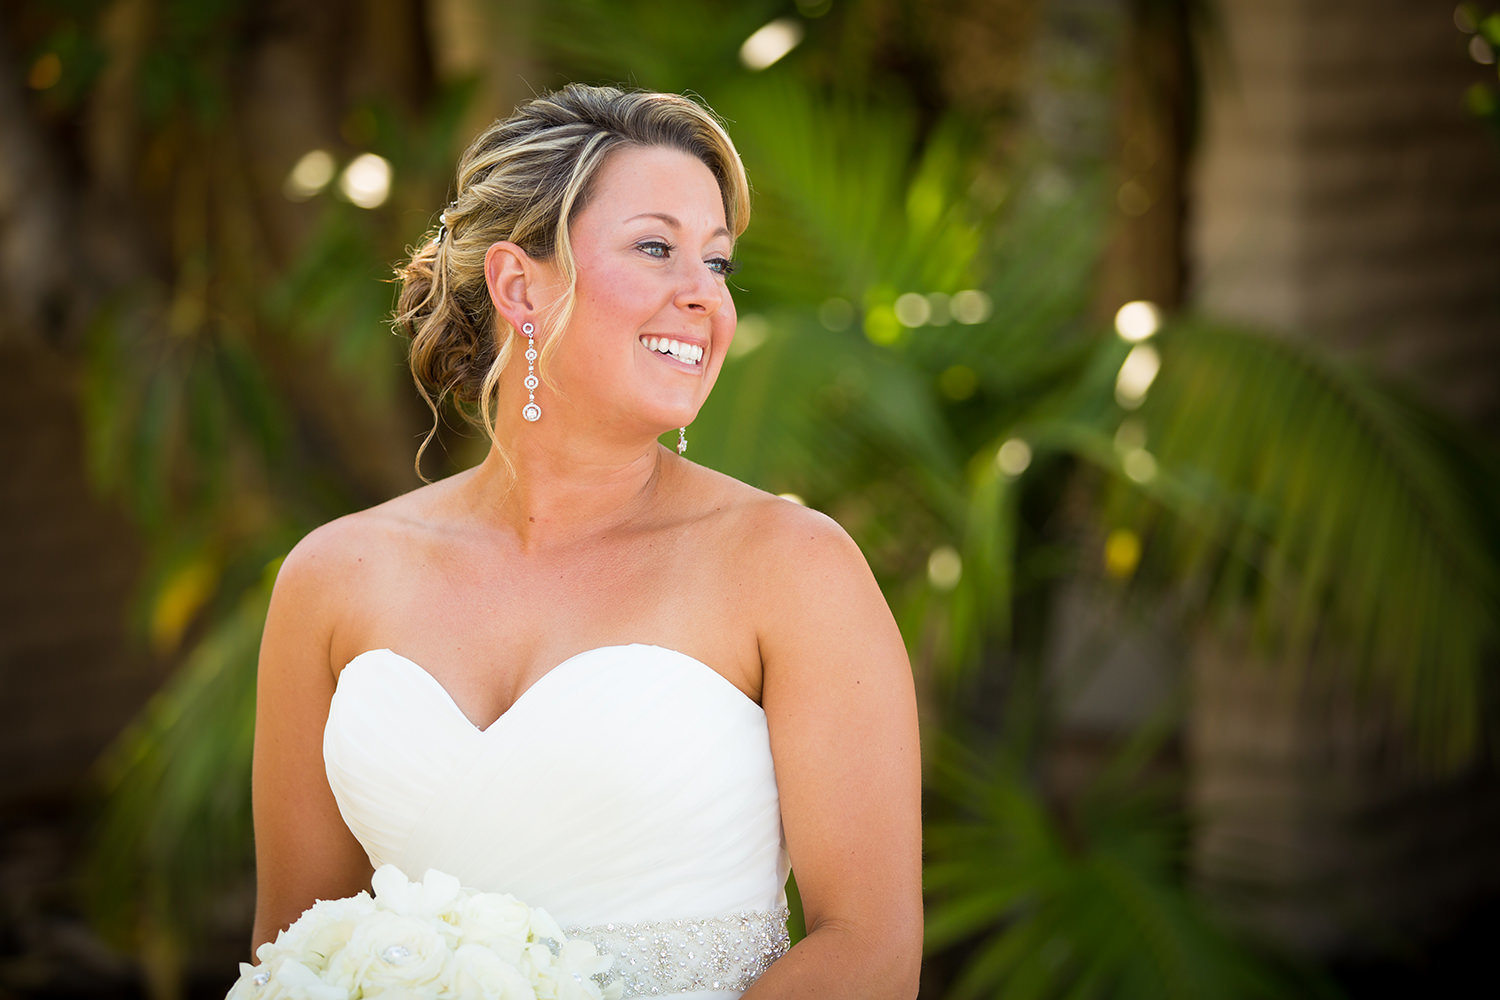 A bride with a beautiful smile in a natural moment